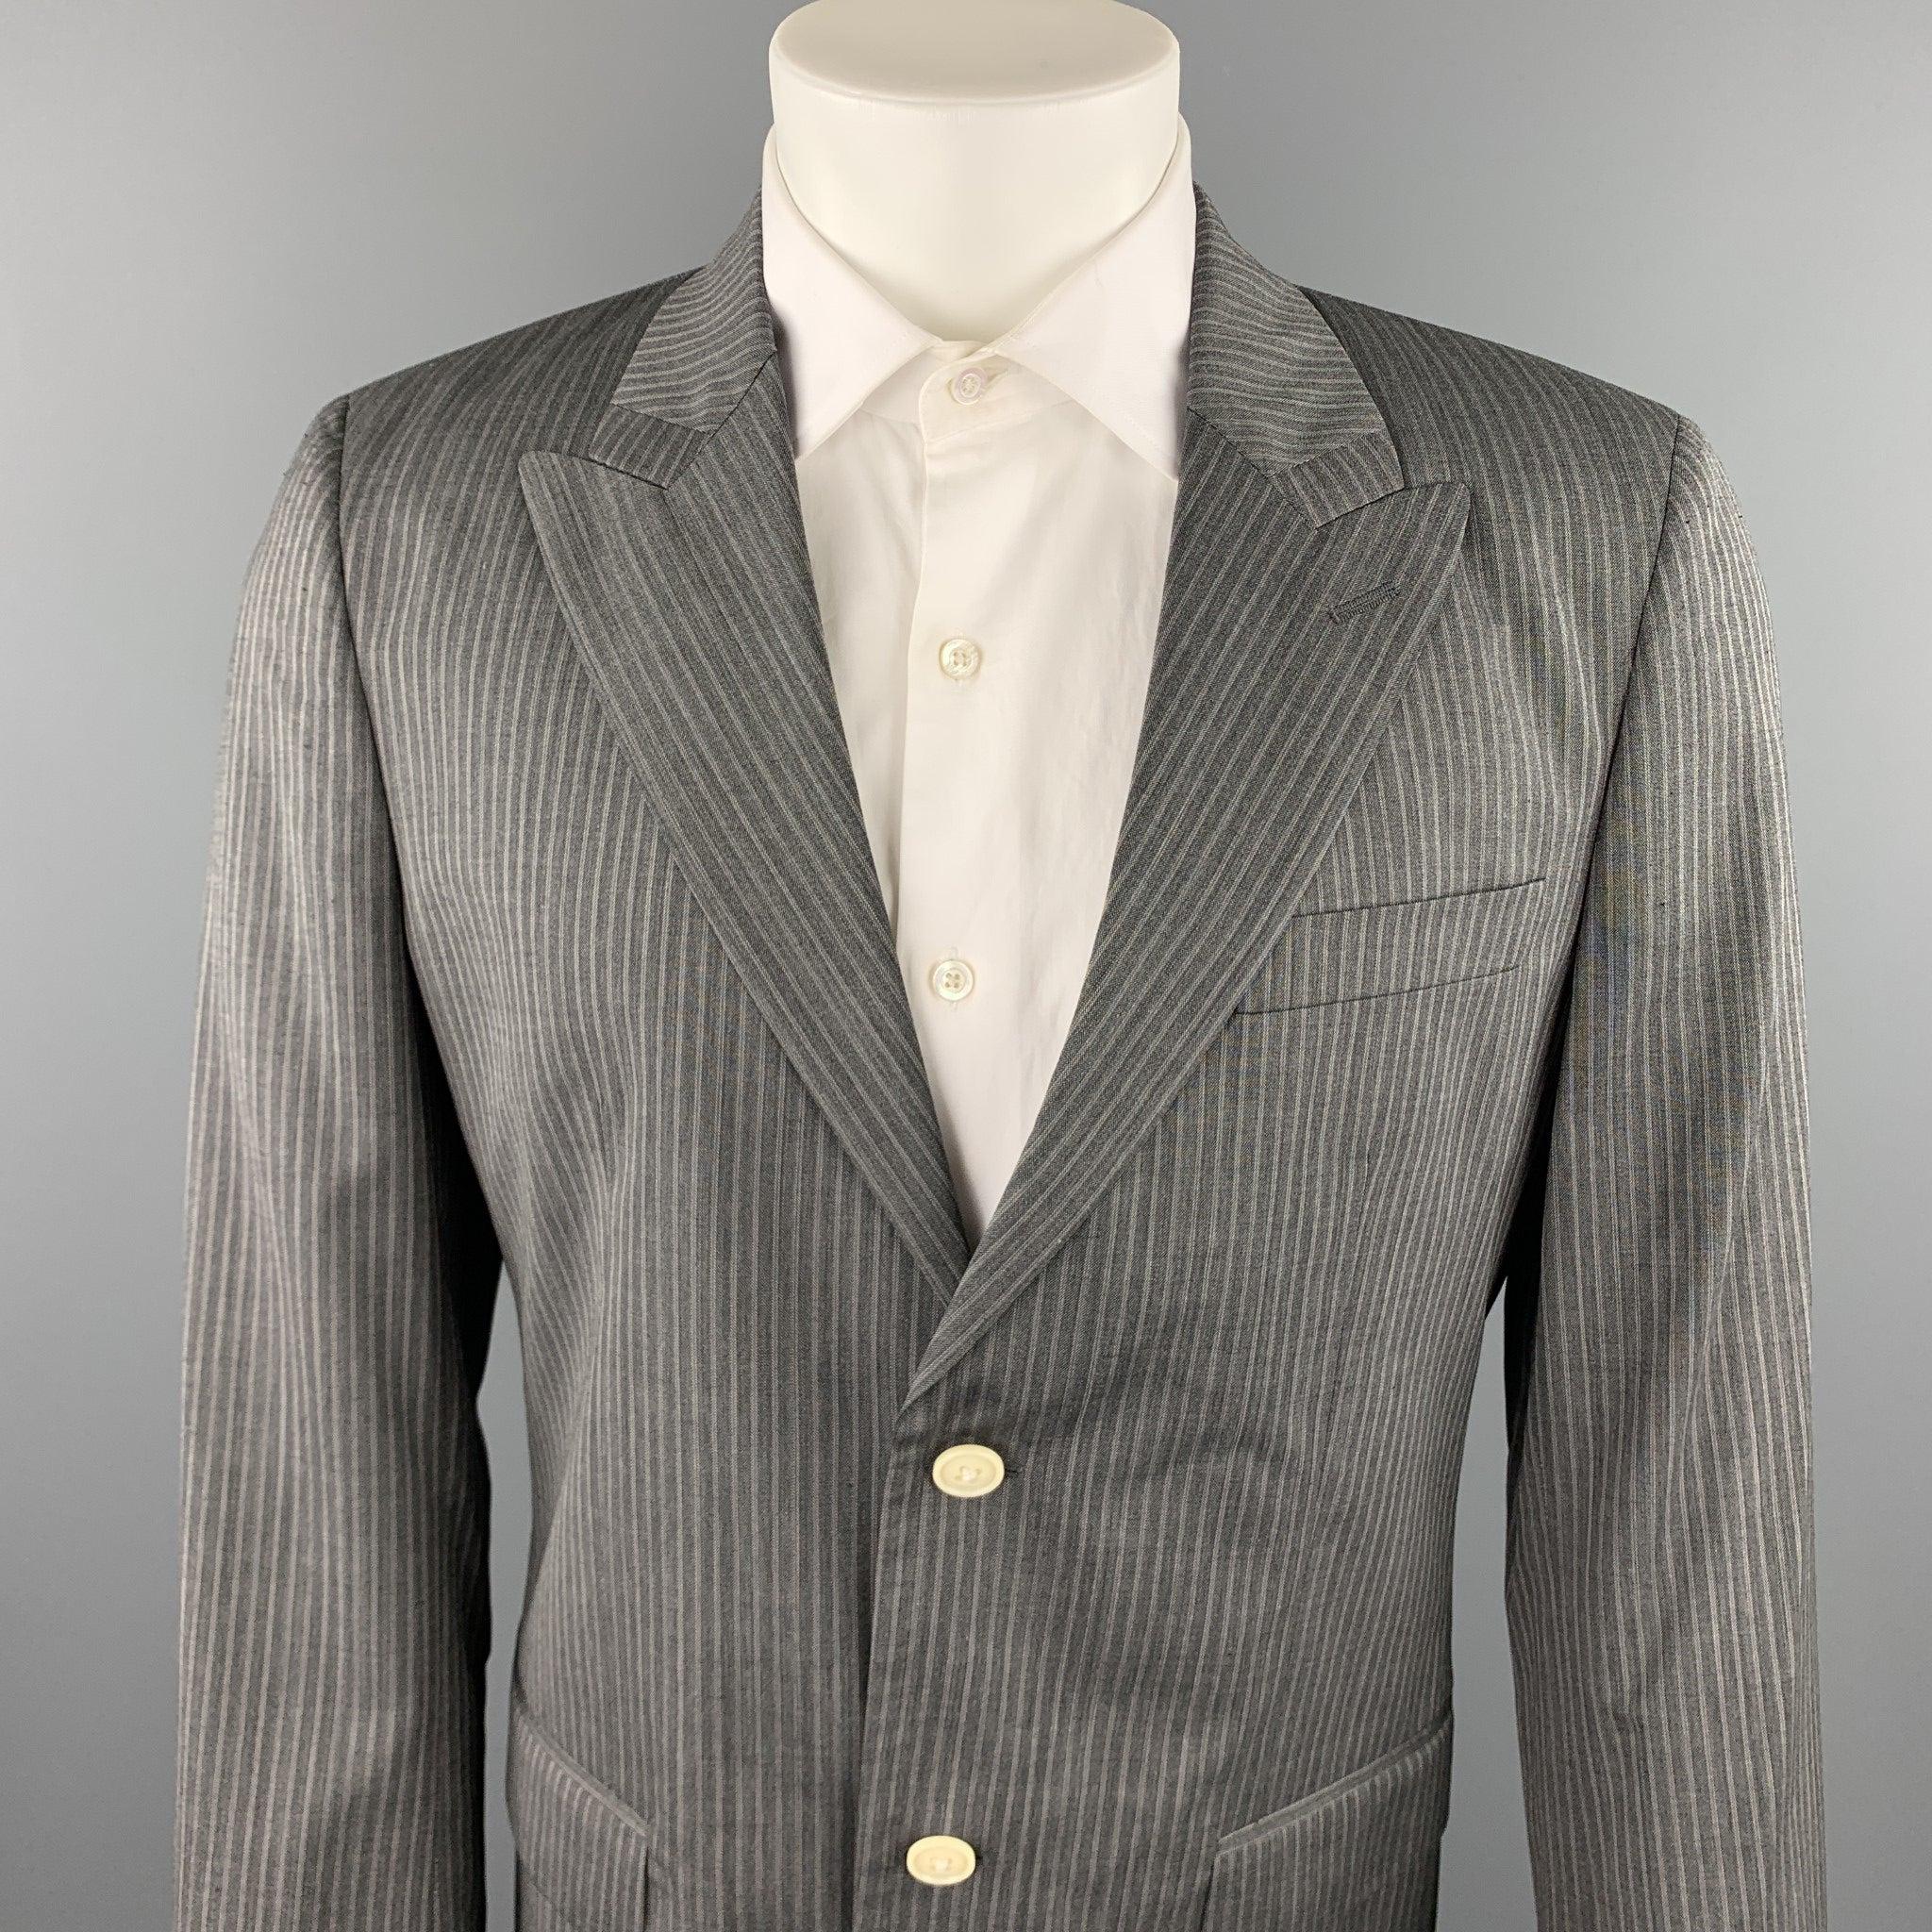 MARC JACOBS sport coat comes in a gray stripe wool with a full white liner featuring a peak lapel, flap pockets, and a two button closure. Made in Italy.New With Tags. 
 

 Marked:  IT 50 
 

 Measurements: 
  
 Shoulder: 17.5 inches 
 Chest: 40